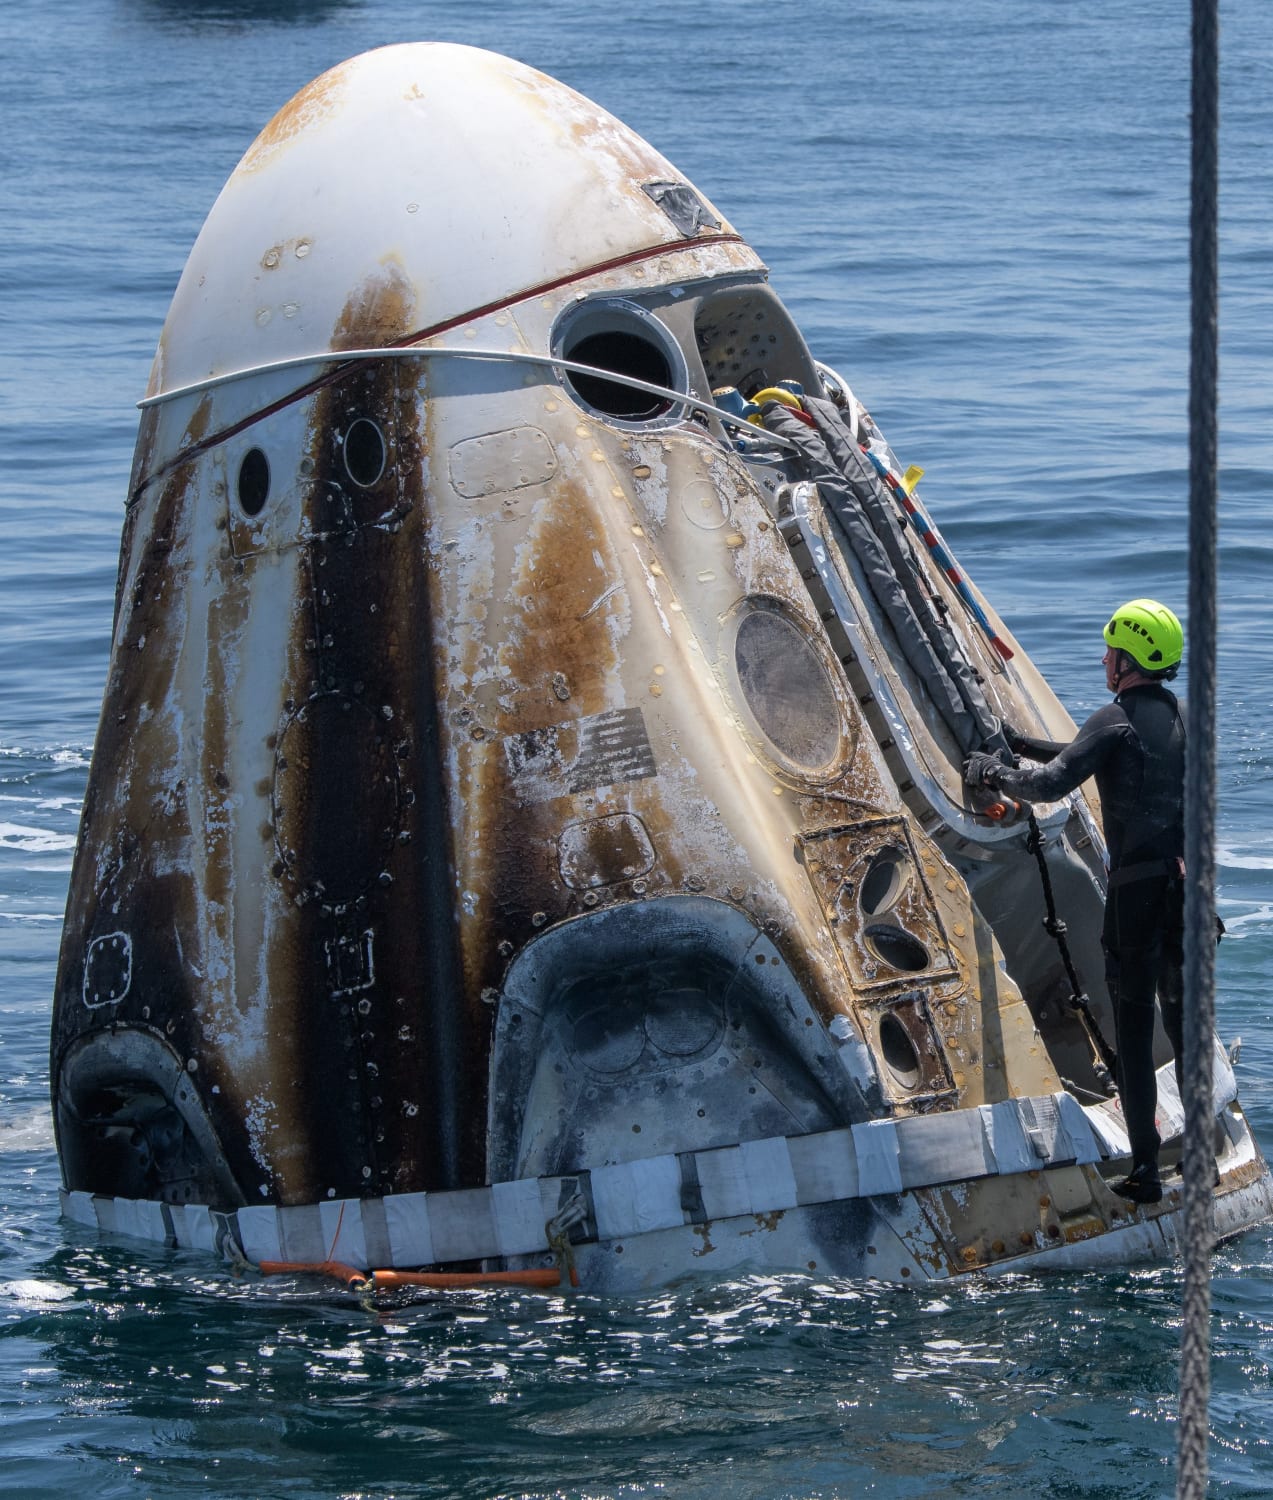 "Support teams arrive at the SpaceX Crew Dragon Endeavour spacecraft shortly after it landed with NASA astronauts Robert Behnken and Douglas Hurley onboard in the Gulf of Mexico off the coast of" Pensacola, Florida, United States of America, on 2 August 2020. Photographer: Bill Ingalls, NASA